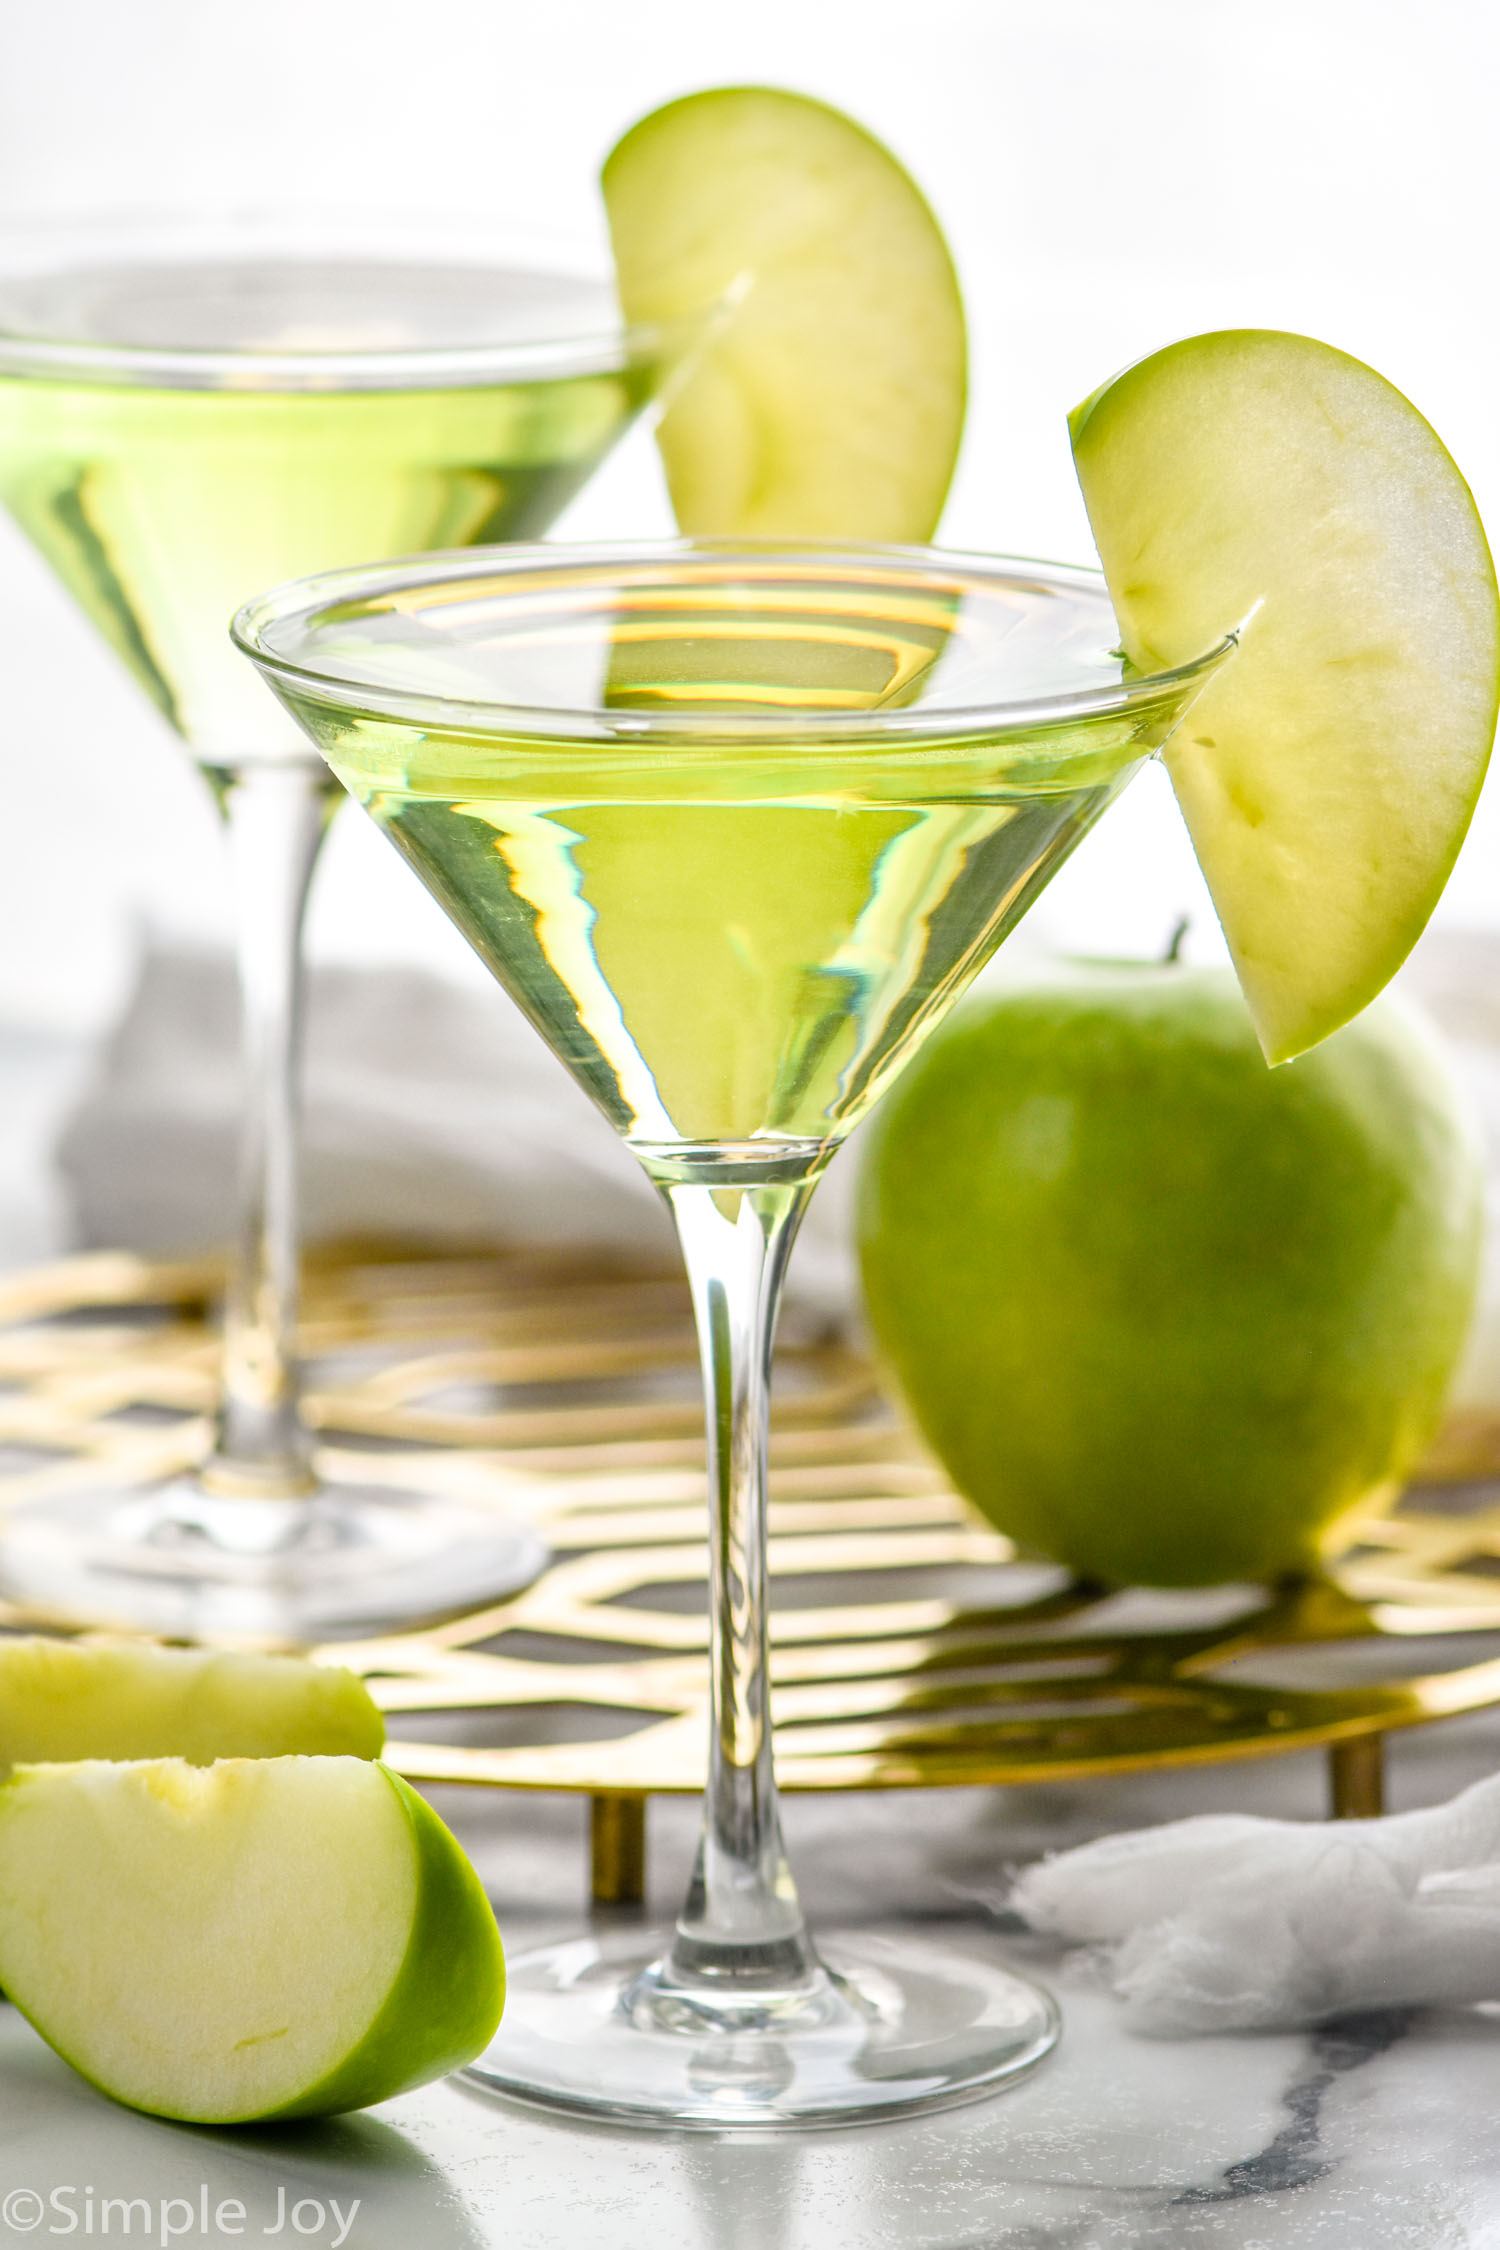 two martini glasses of Appletini garnished with a green apple slice. Green apple and slices surrounding.